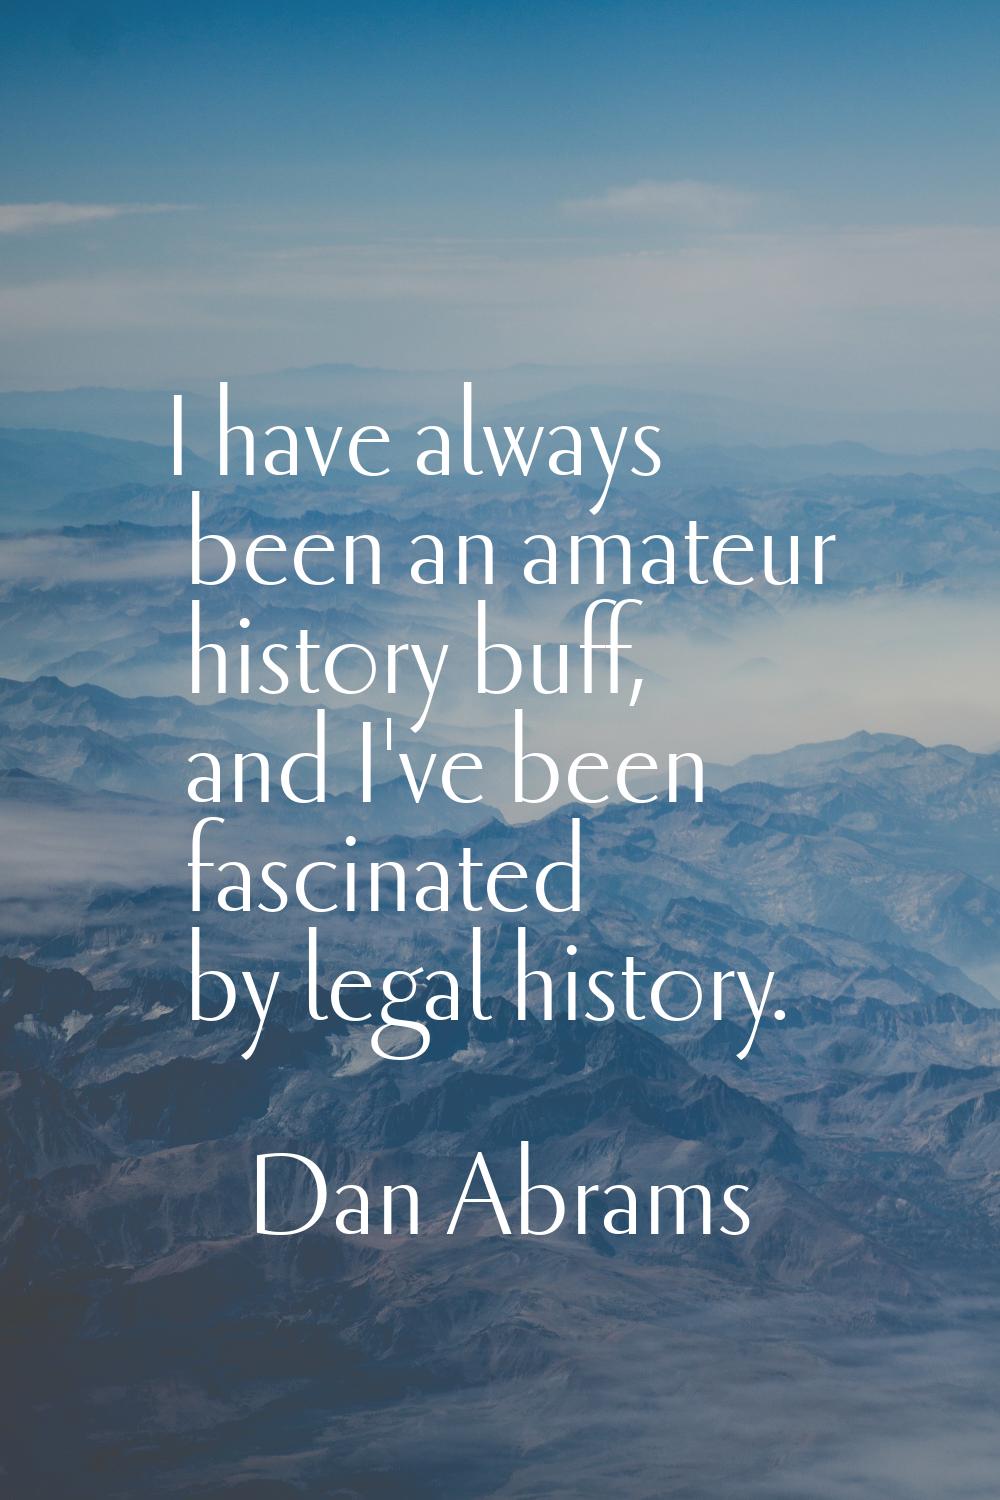 I have always been an amateur history buff, and I've been fascinated by legal history.